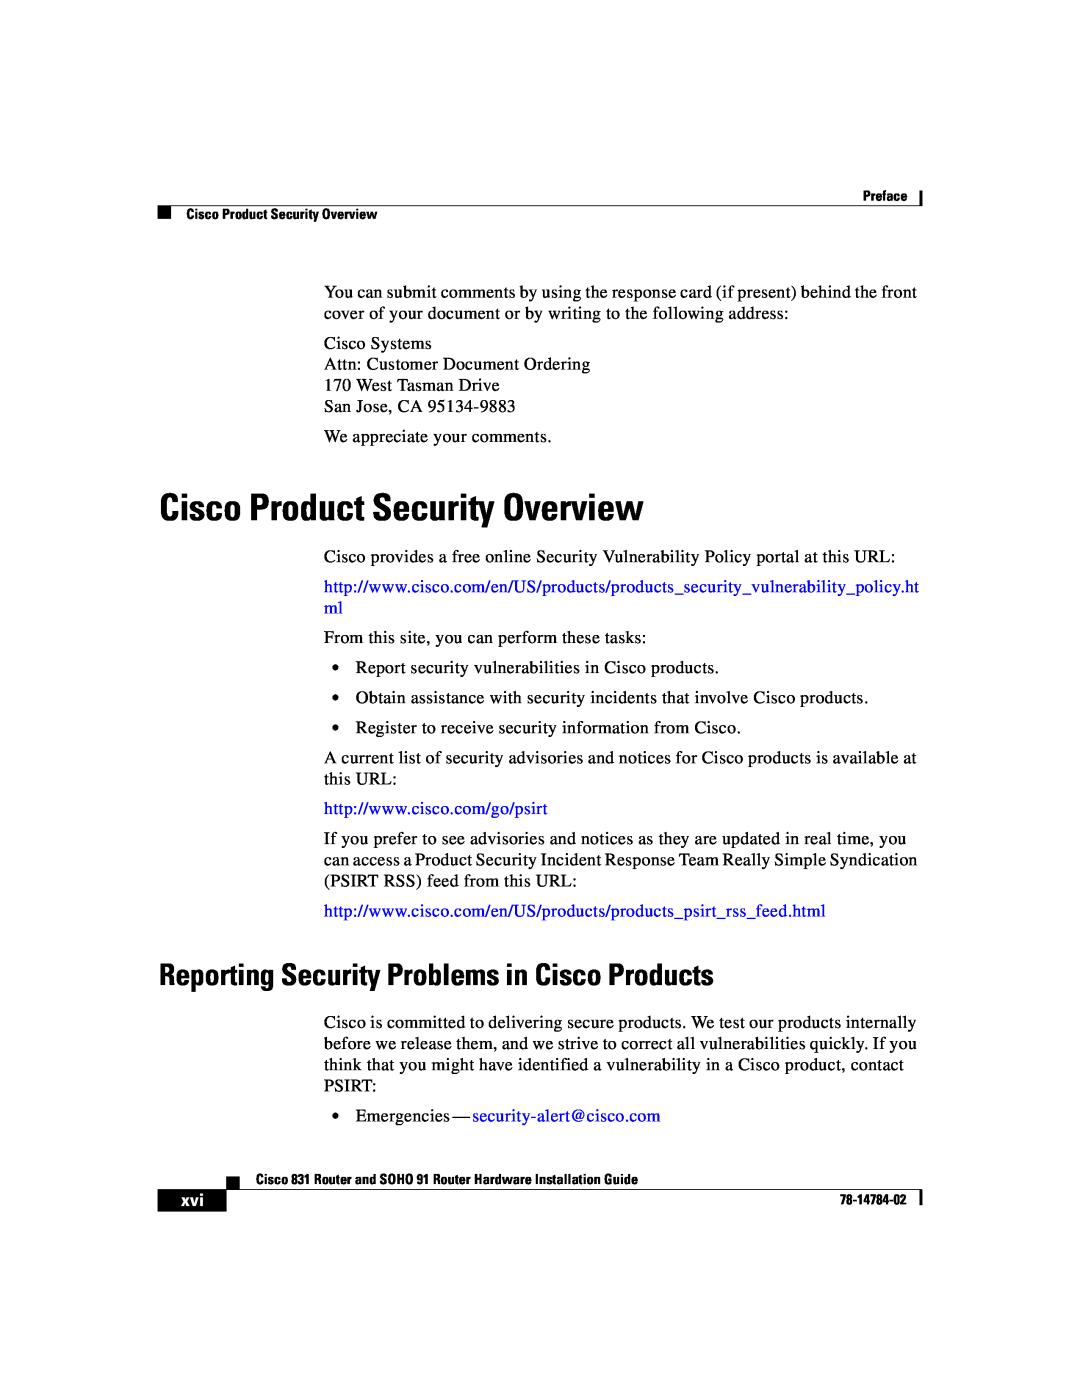 Cisco Systems 78-14784-02 manual Cisco Product Security Overview, Reporting Security Problems in Cisco Products 